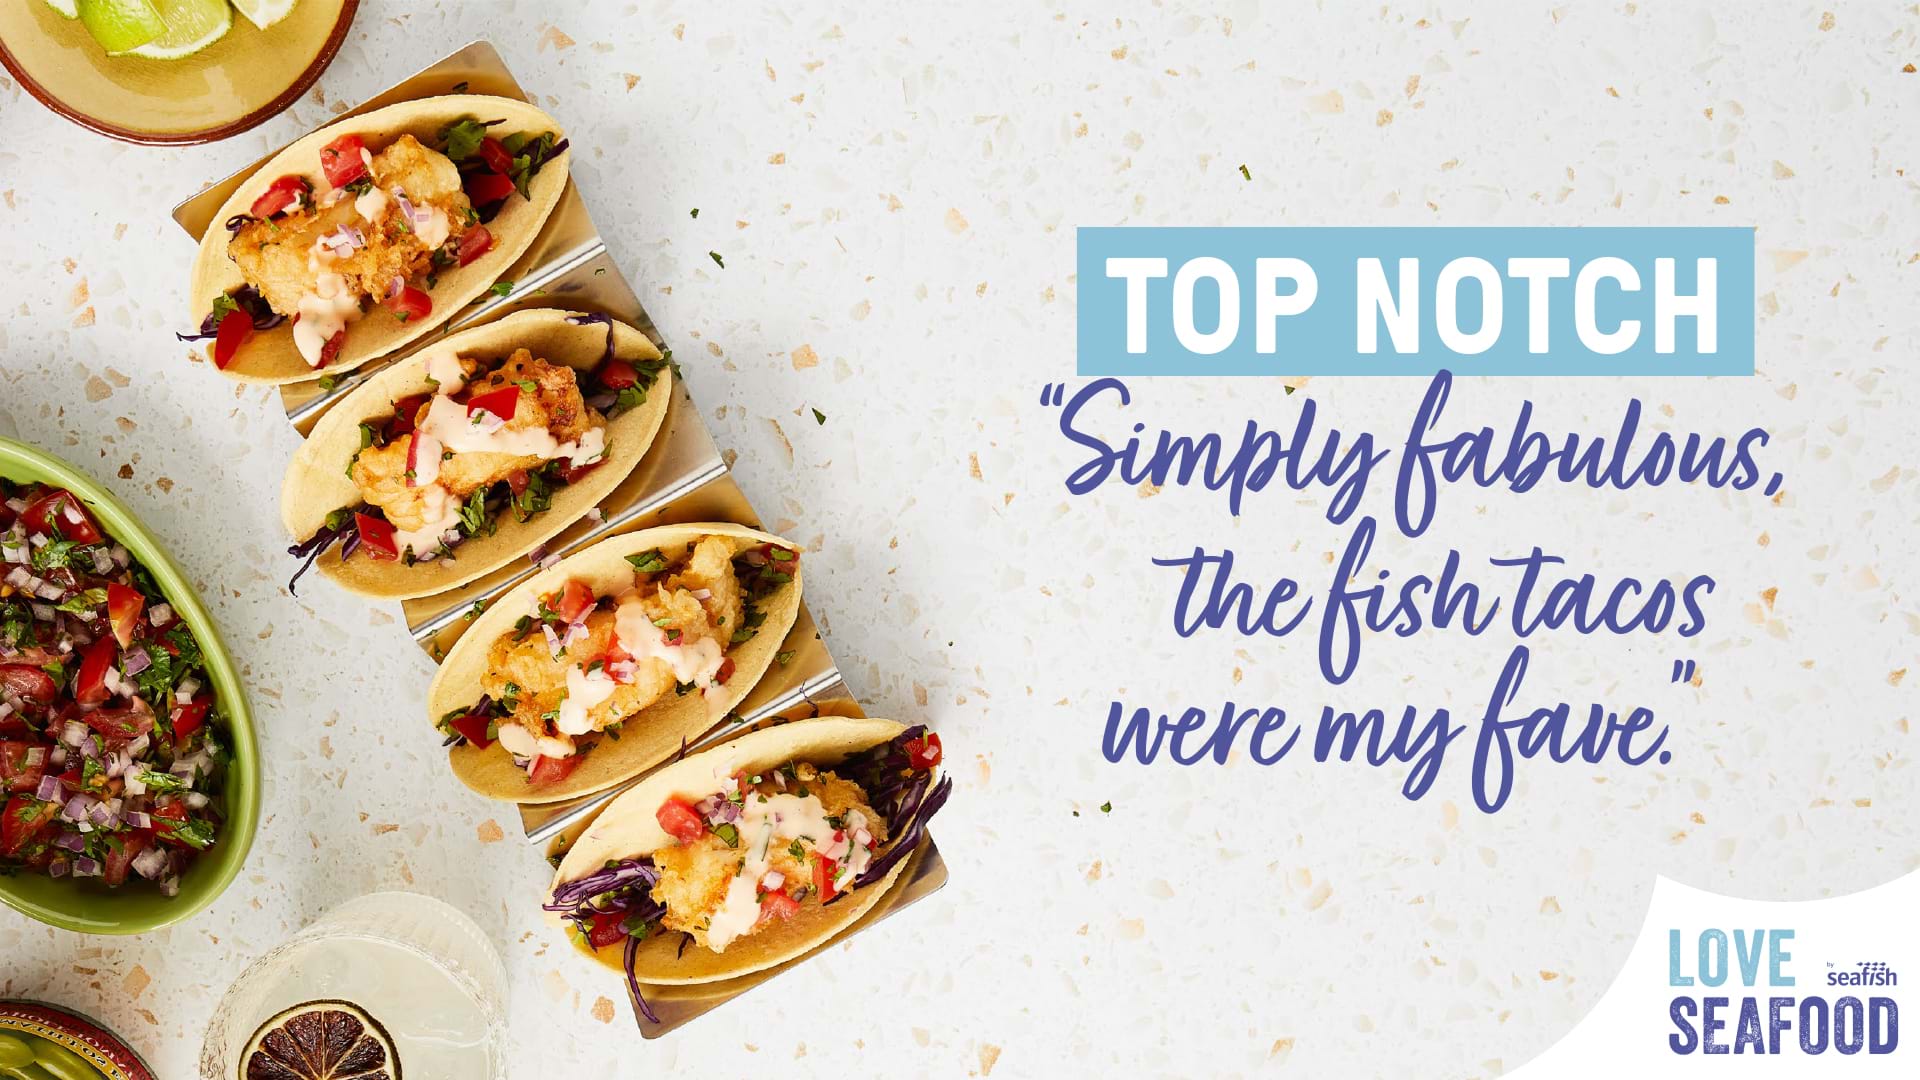 Love seafood fish in foodservice campaign graphic - photo of fish tacos with text 'Top notch - simply fabulous, the fish tacos were my fave'